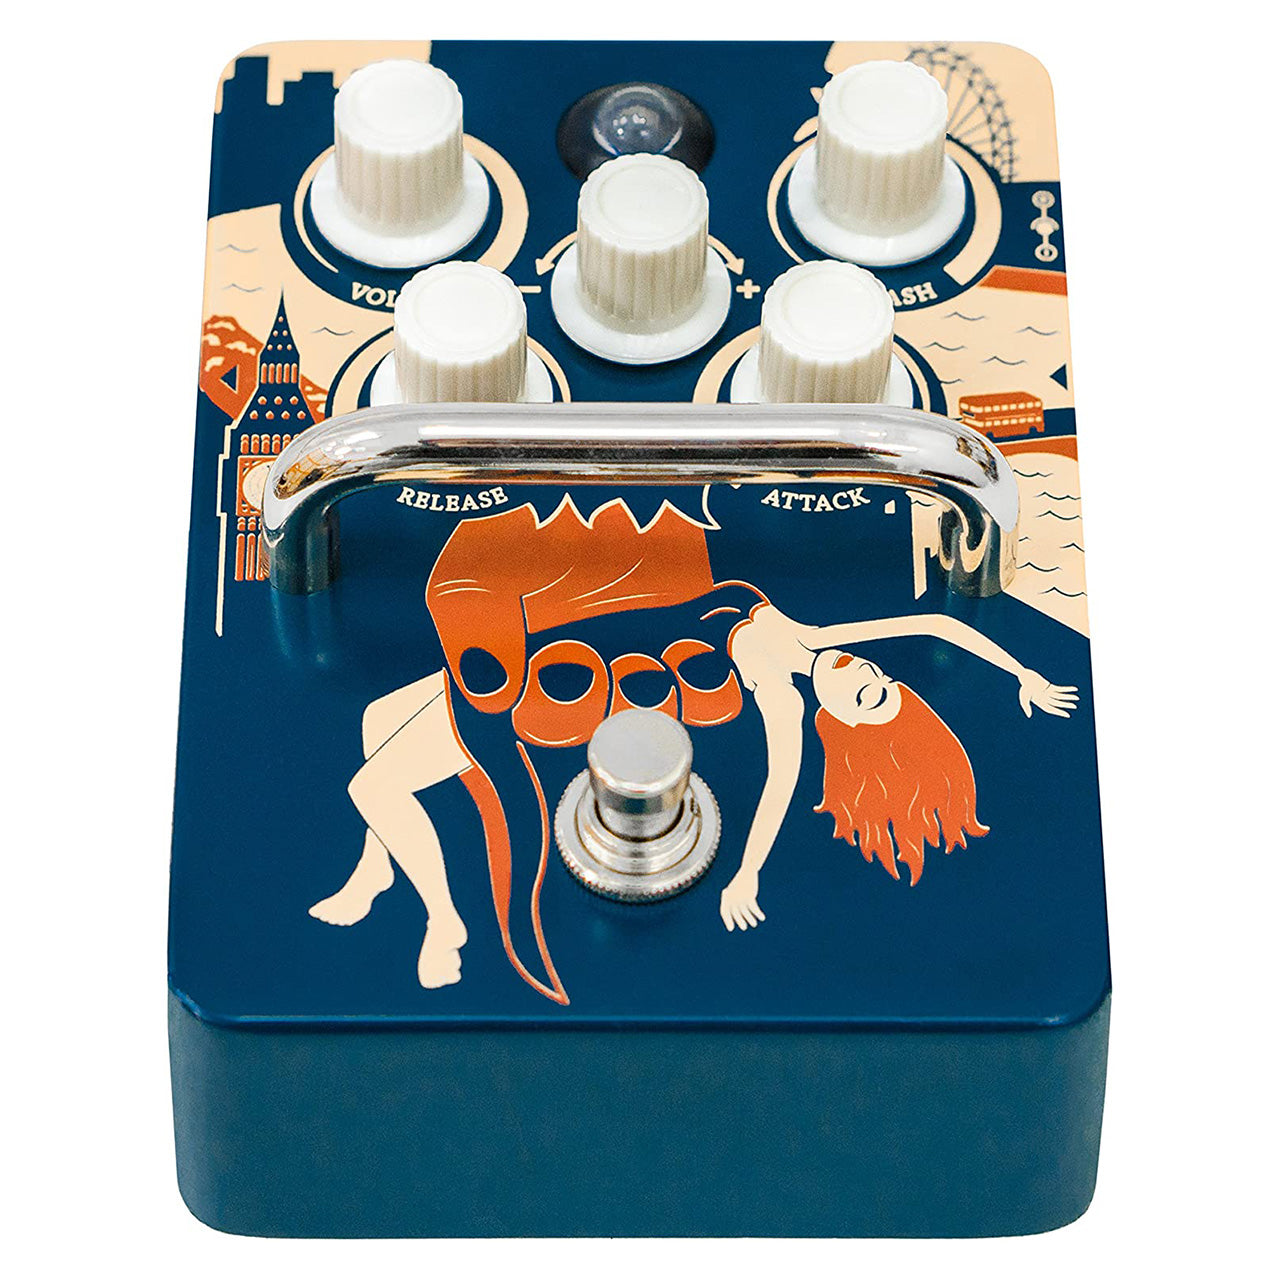 Orange Amps Kongpressor Optical Class A Compressor Guitar Pedal with 12dB Clean Boost for Electric Guitars